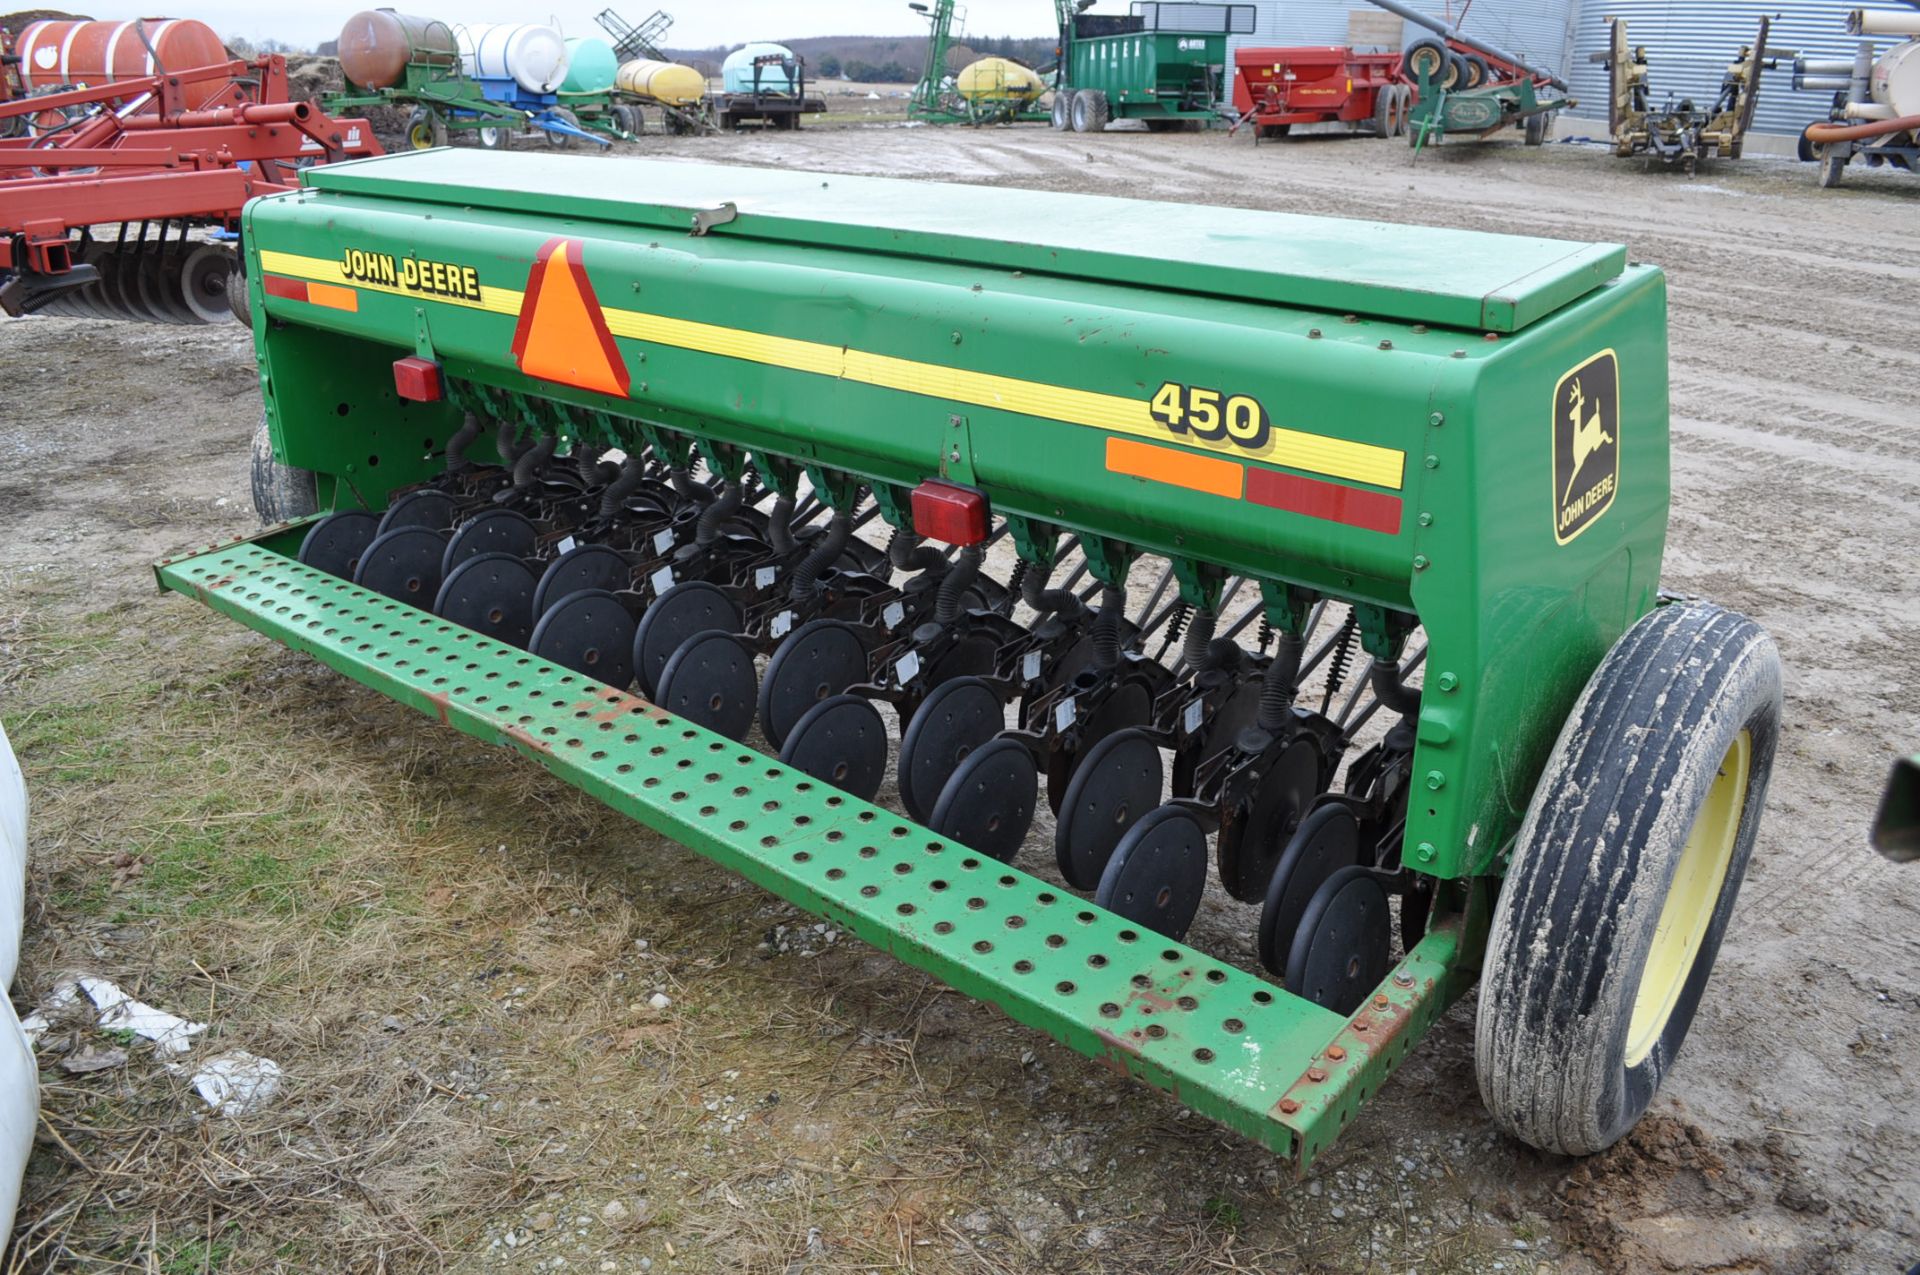 John Deere 450 end wheel grain drill, 17 hole, 7.50-20 tires, SN 690610, low acres - Image 3 of 8